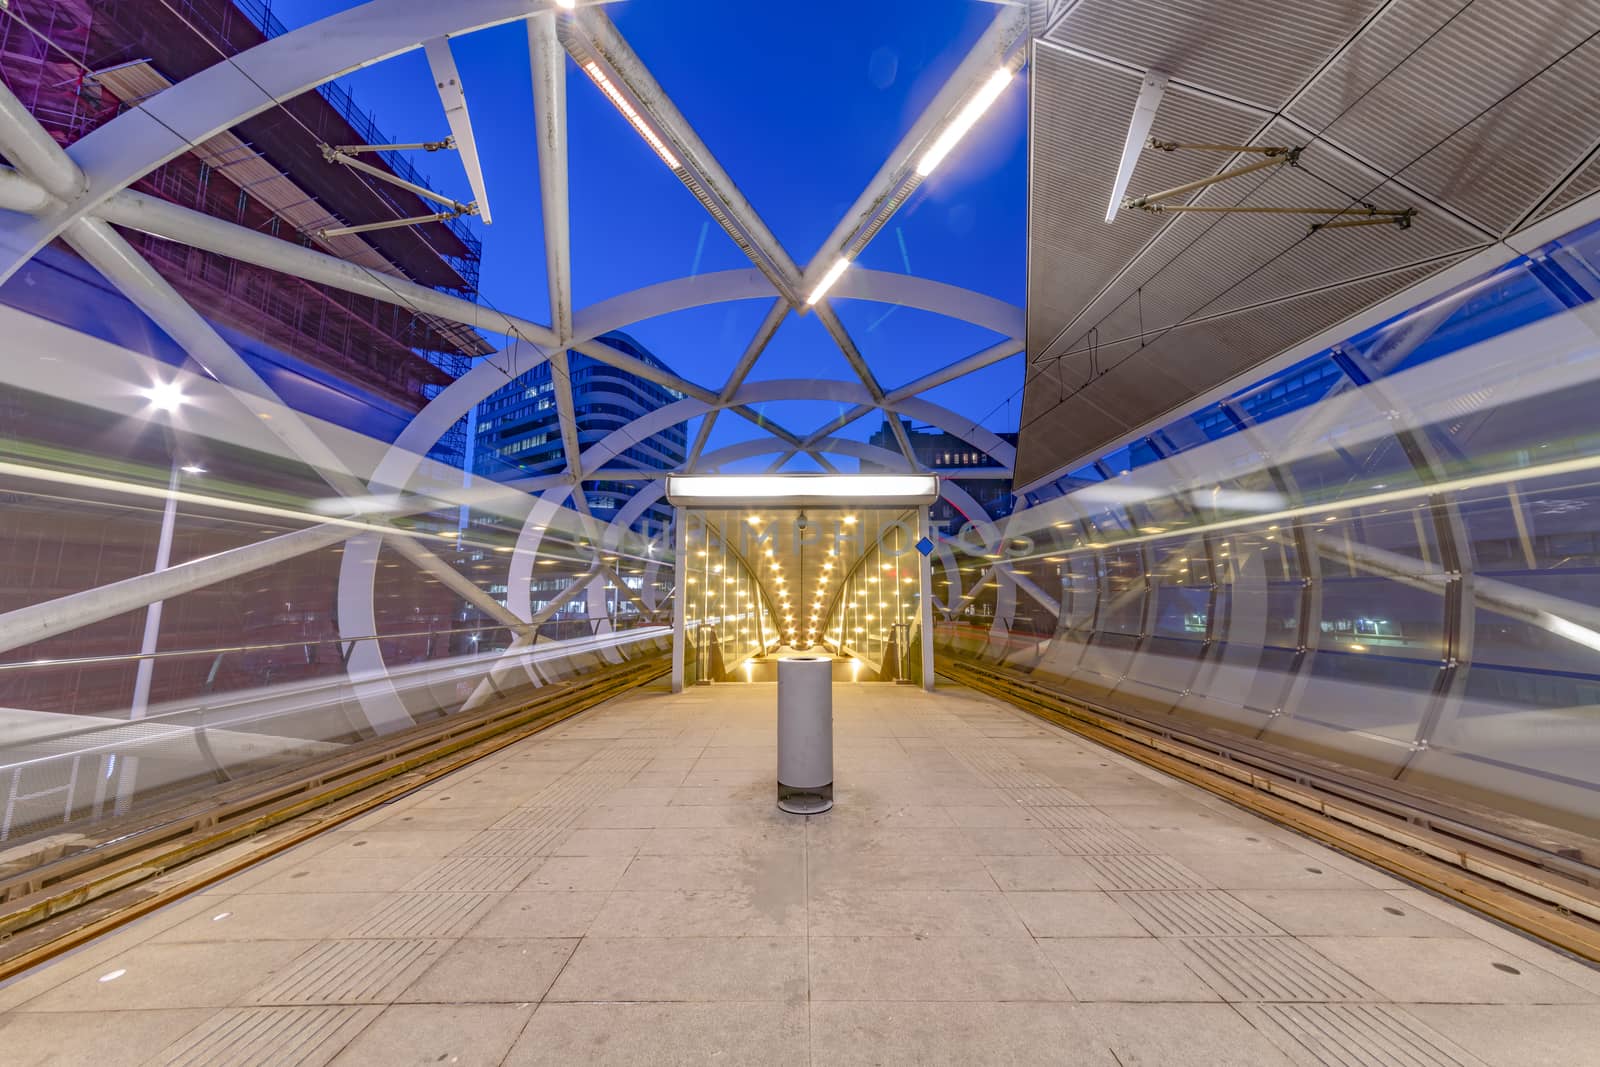 The Hague Beatrixkwartier tram station platform illumated at night waiting for passengers during the blue hour, The Hague, Netherlands
 by ankorlight